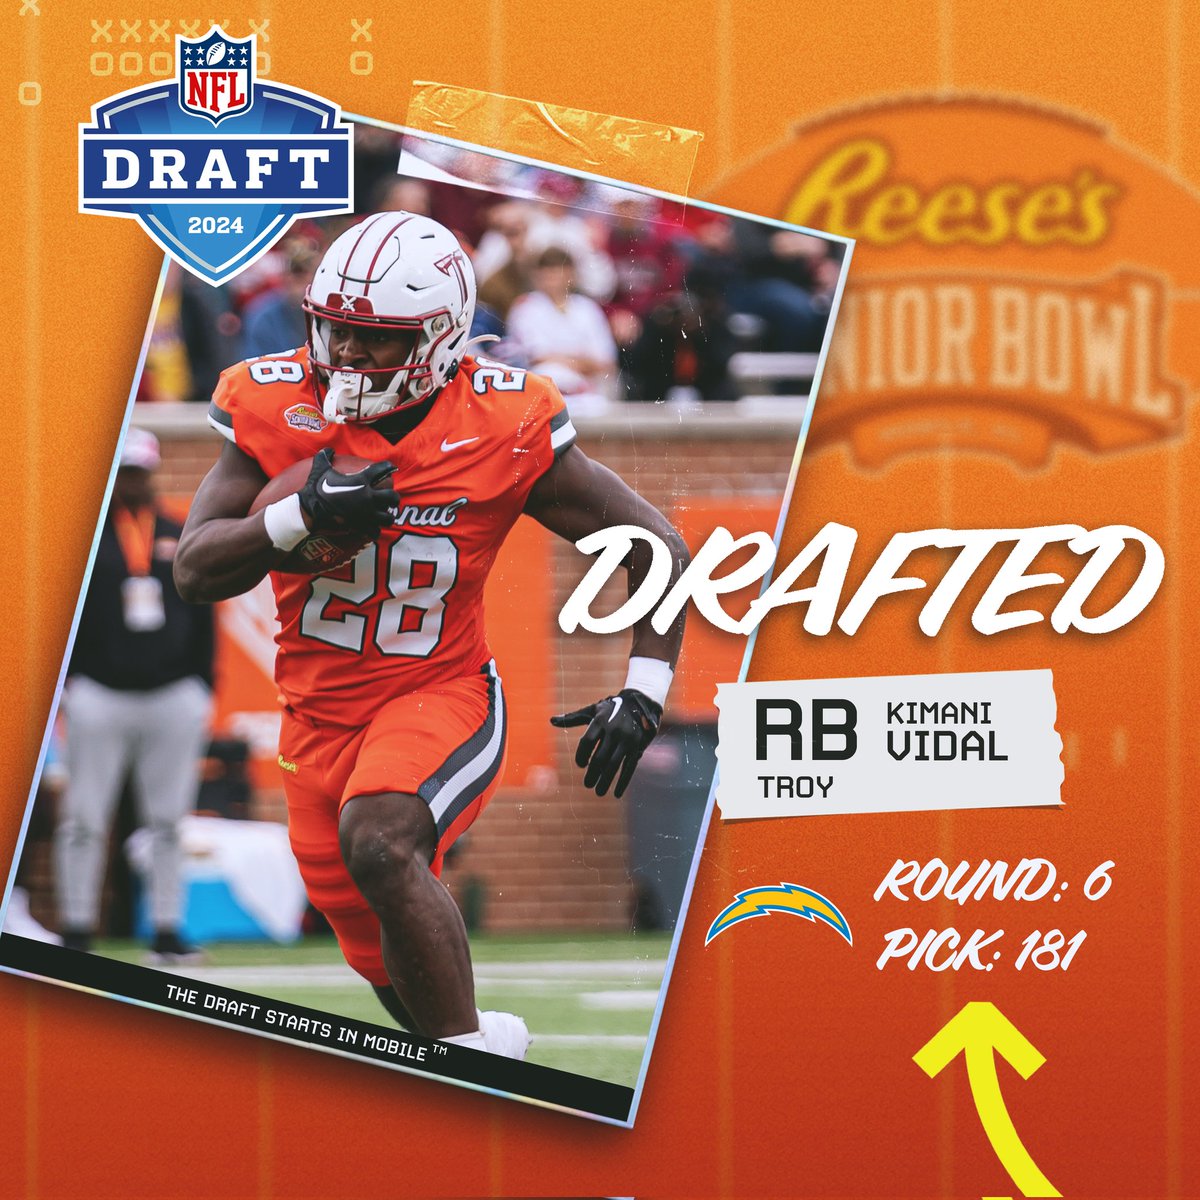 Congratulations to @MCARisingSenior Legend Kimani Vidal on being drafted by the San Diego Chargers